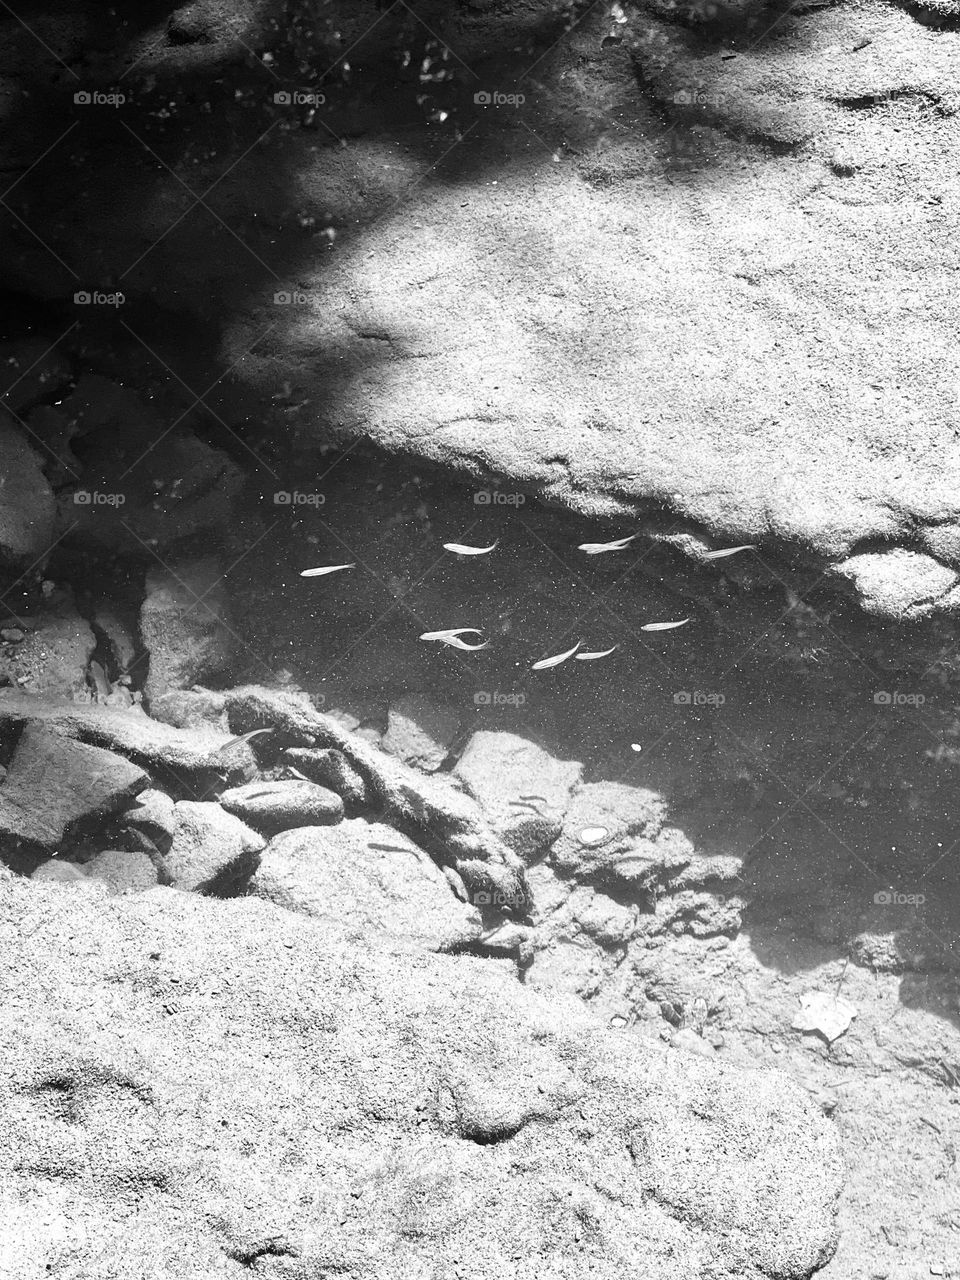 A school of minnows swim between the rocks in a spring fed clear stream. The tiny fish are visible against the shadows for only a moment.